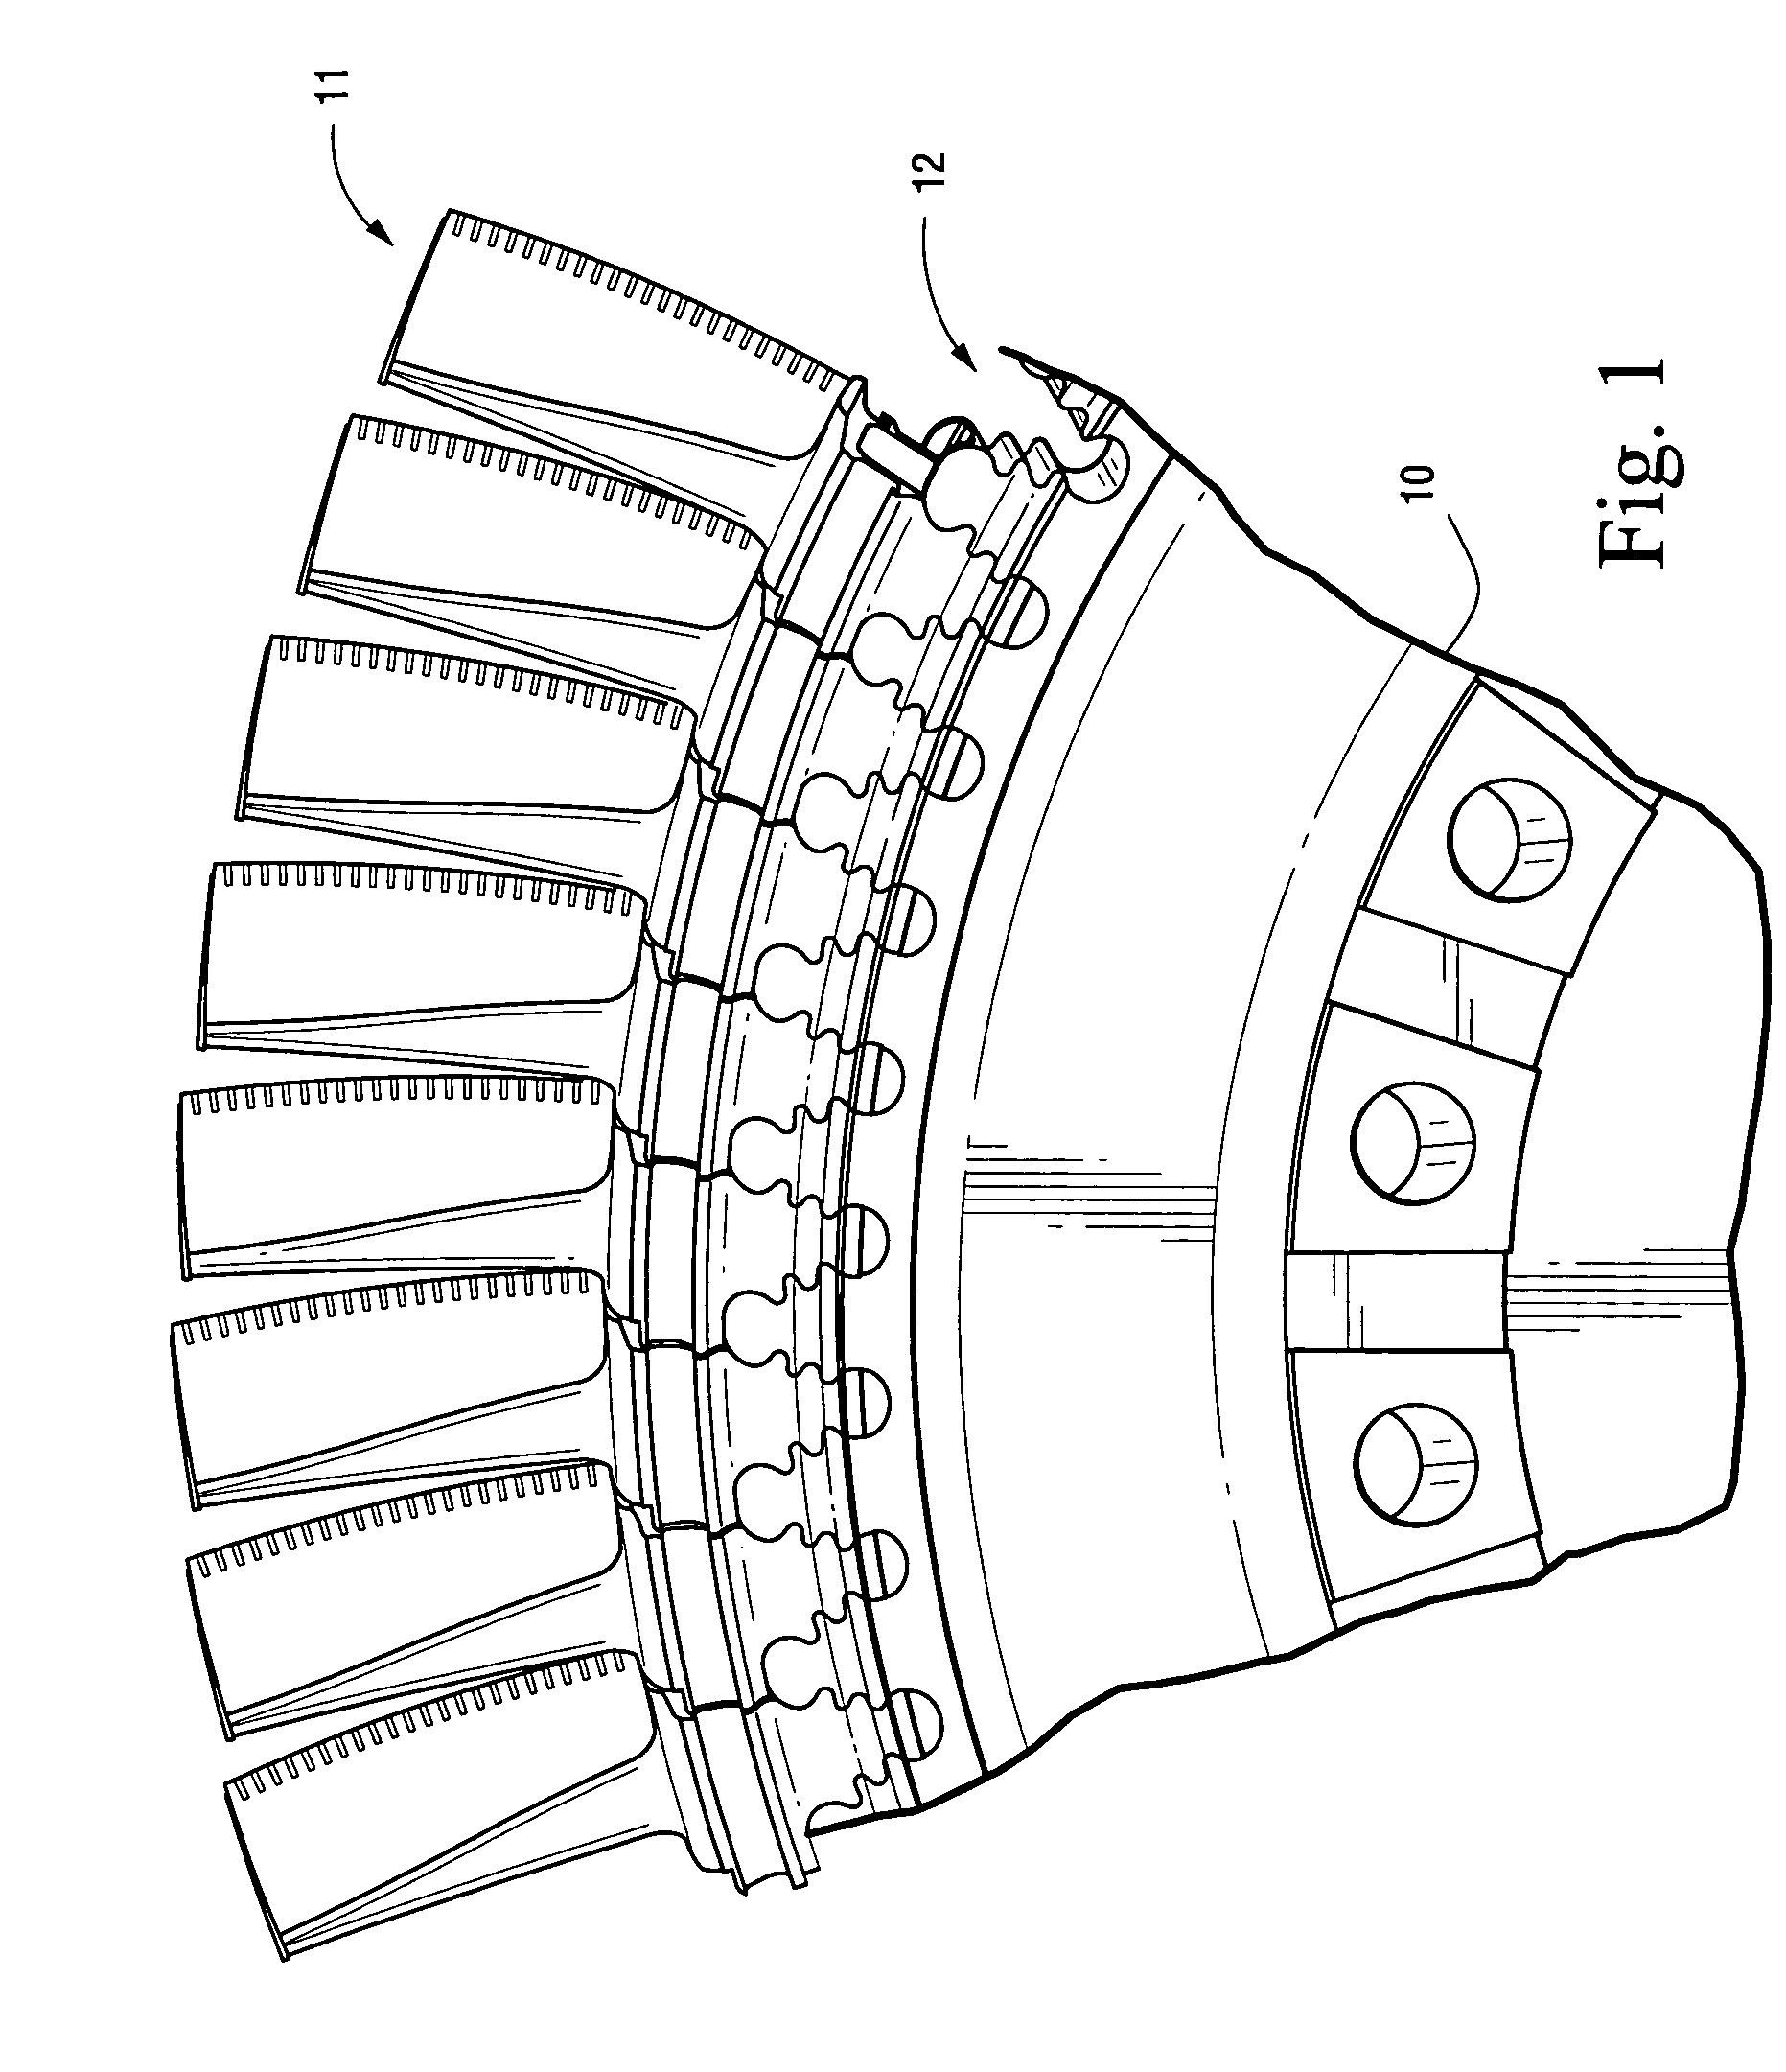 Advanced firtree and broach slot forms for turbine stage 3 buckets and rotor wheels